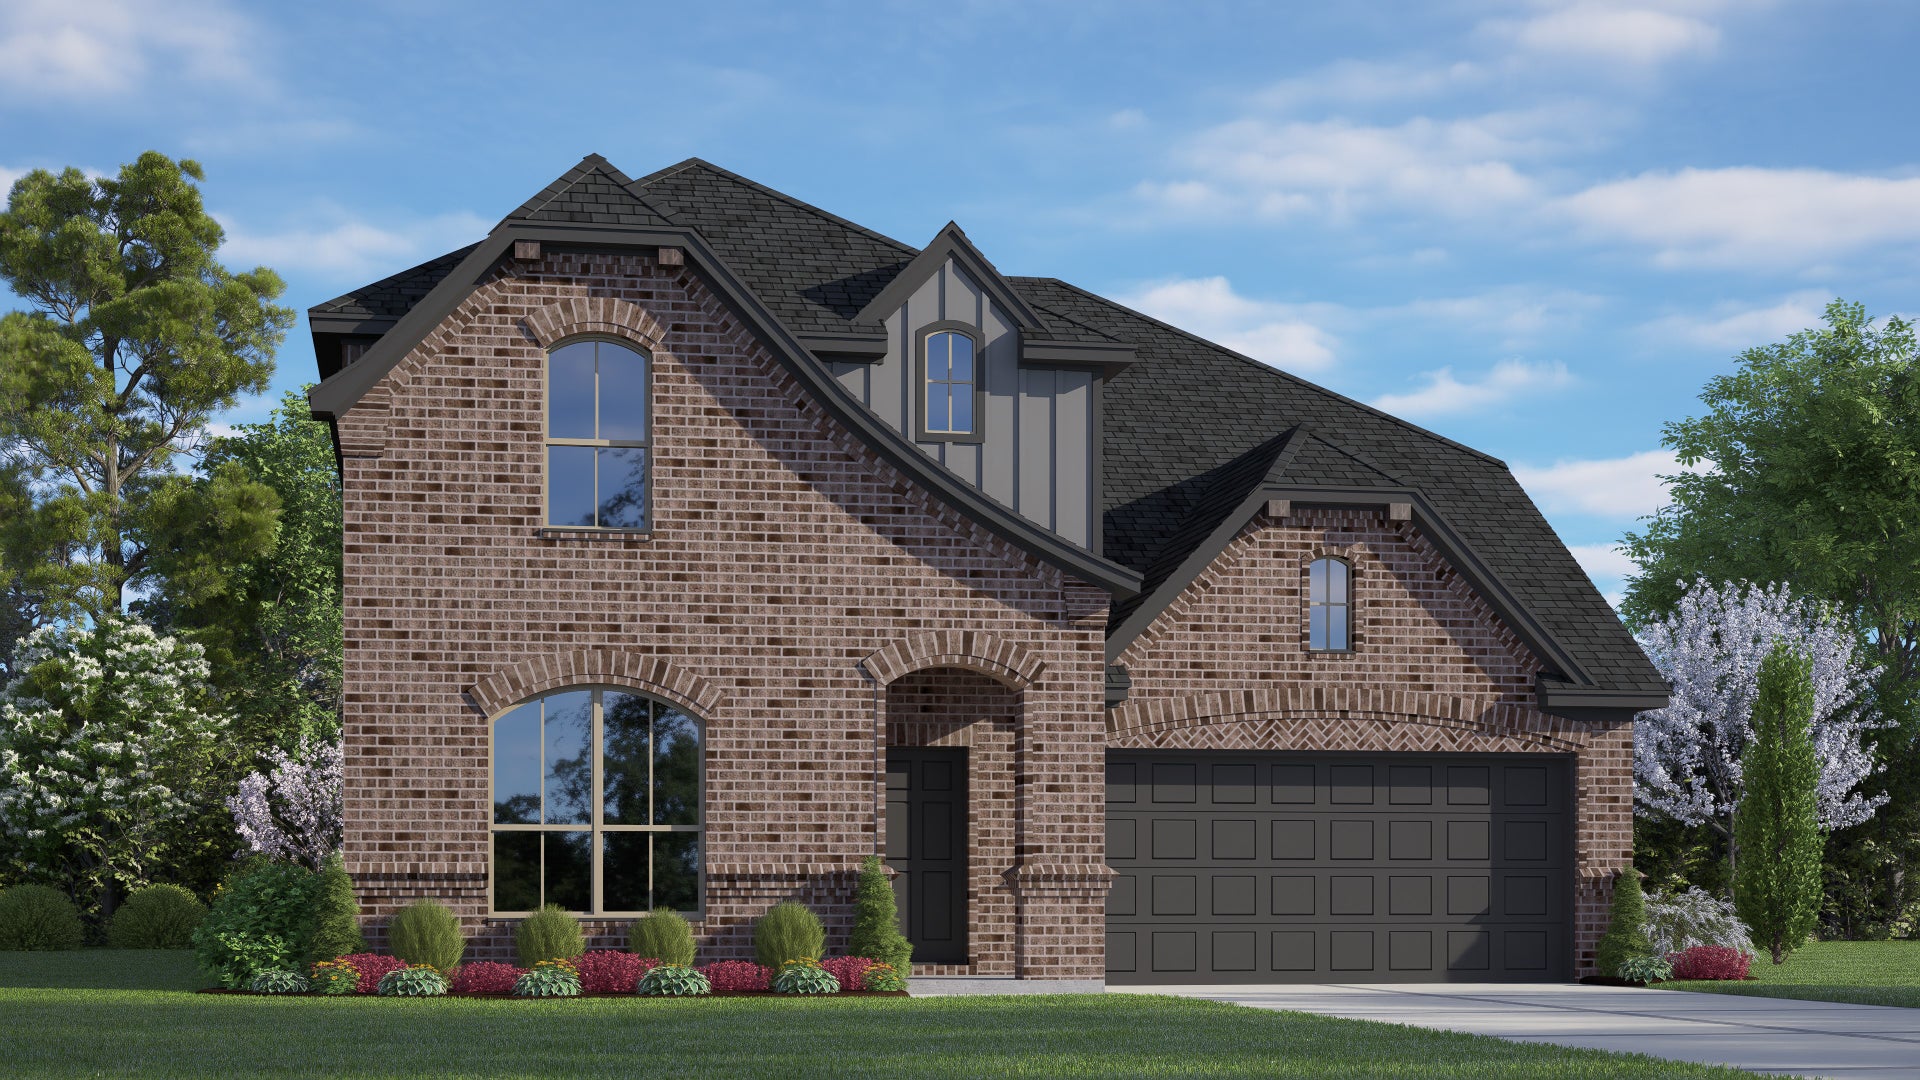 2870 C. 5br New Home in Fort Worth, TX